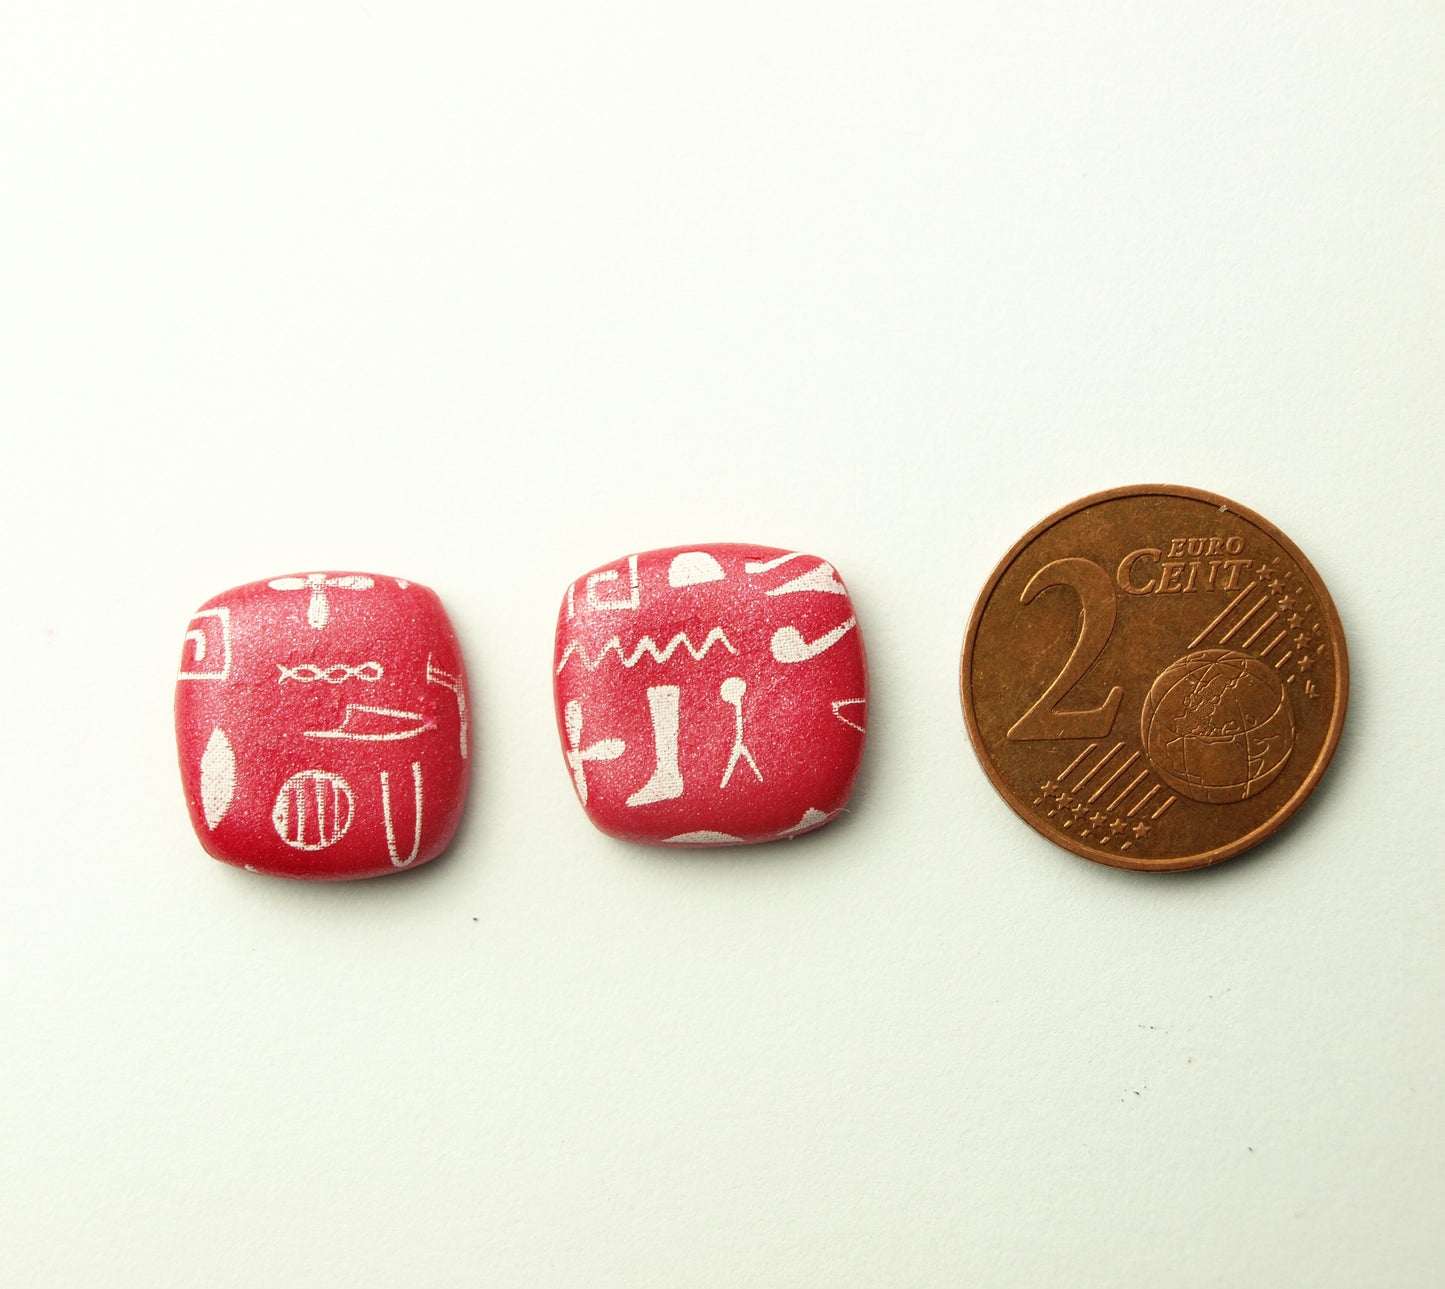 Ohrstecker Retro Muster rot weiß Polymer Clay Fimo Ohrringe Stecker nach Wahl